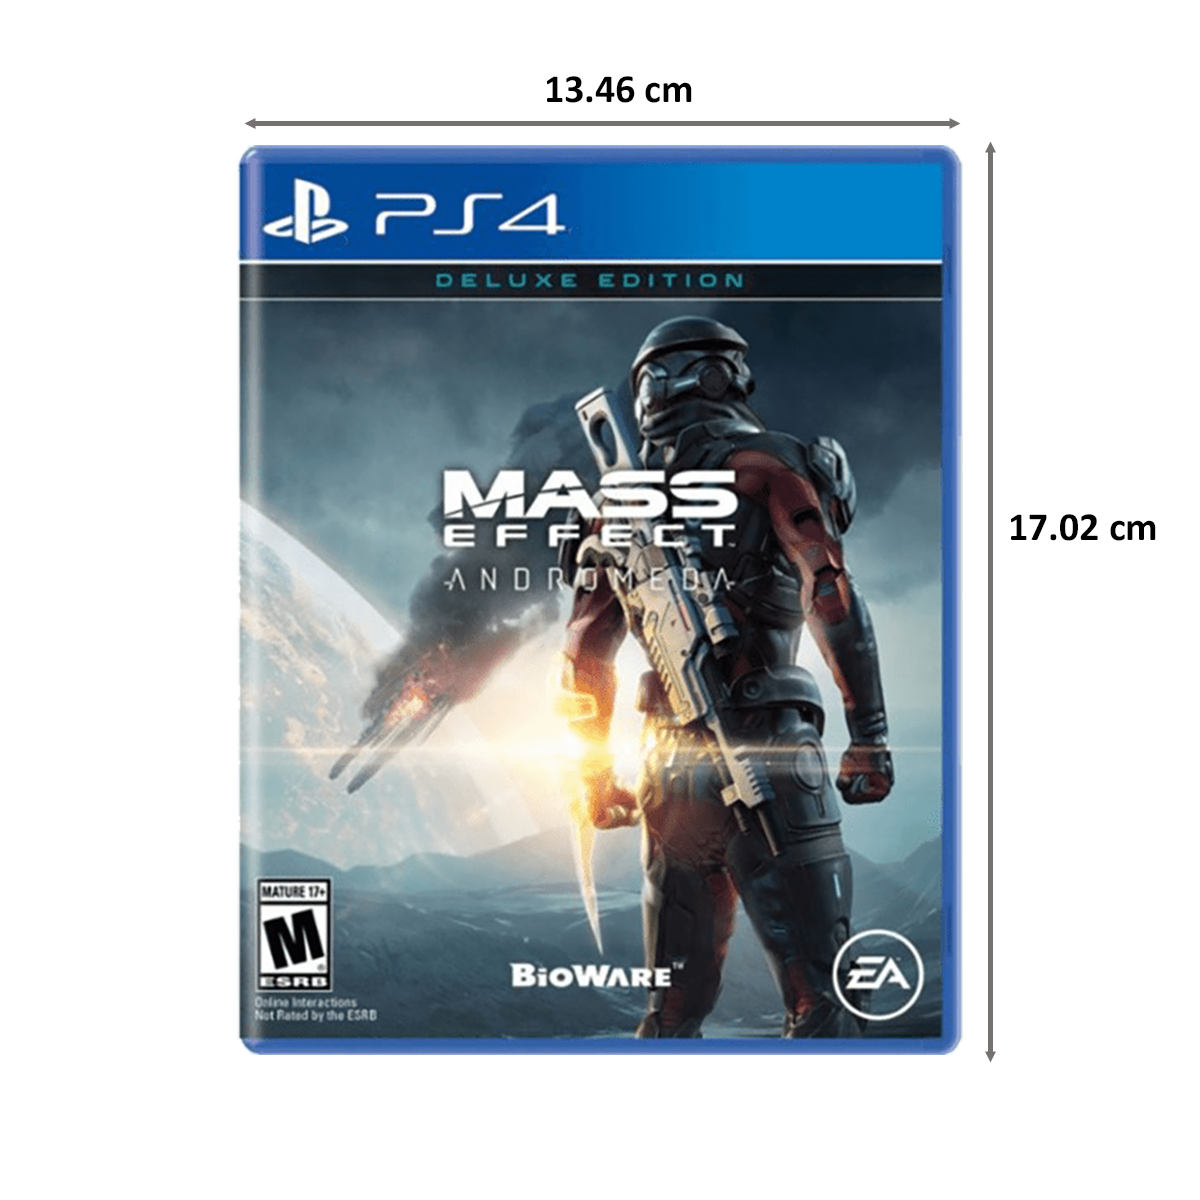 PS4 Game (Mass Effect: Andromeda - Deluxe Edition)_2